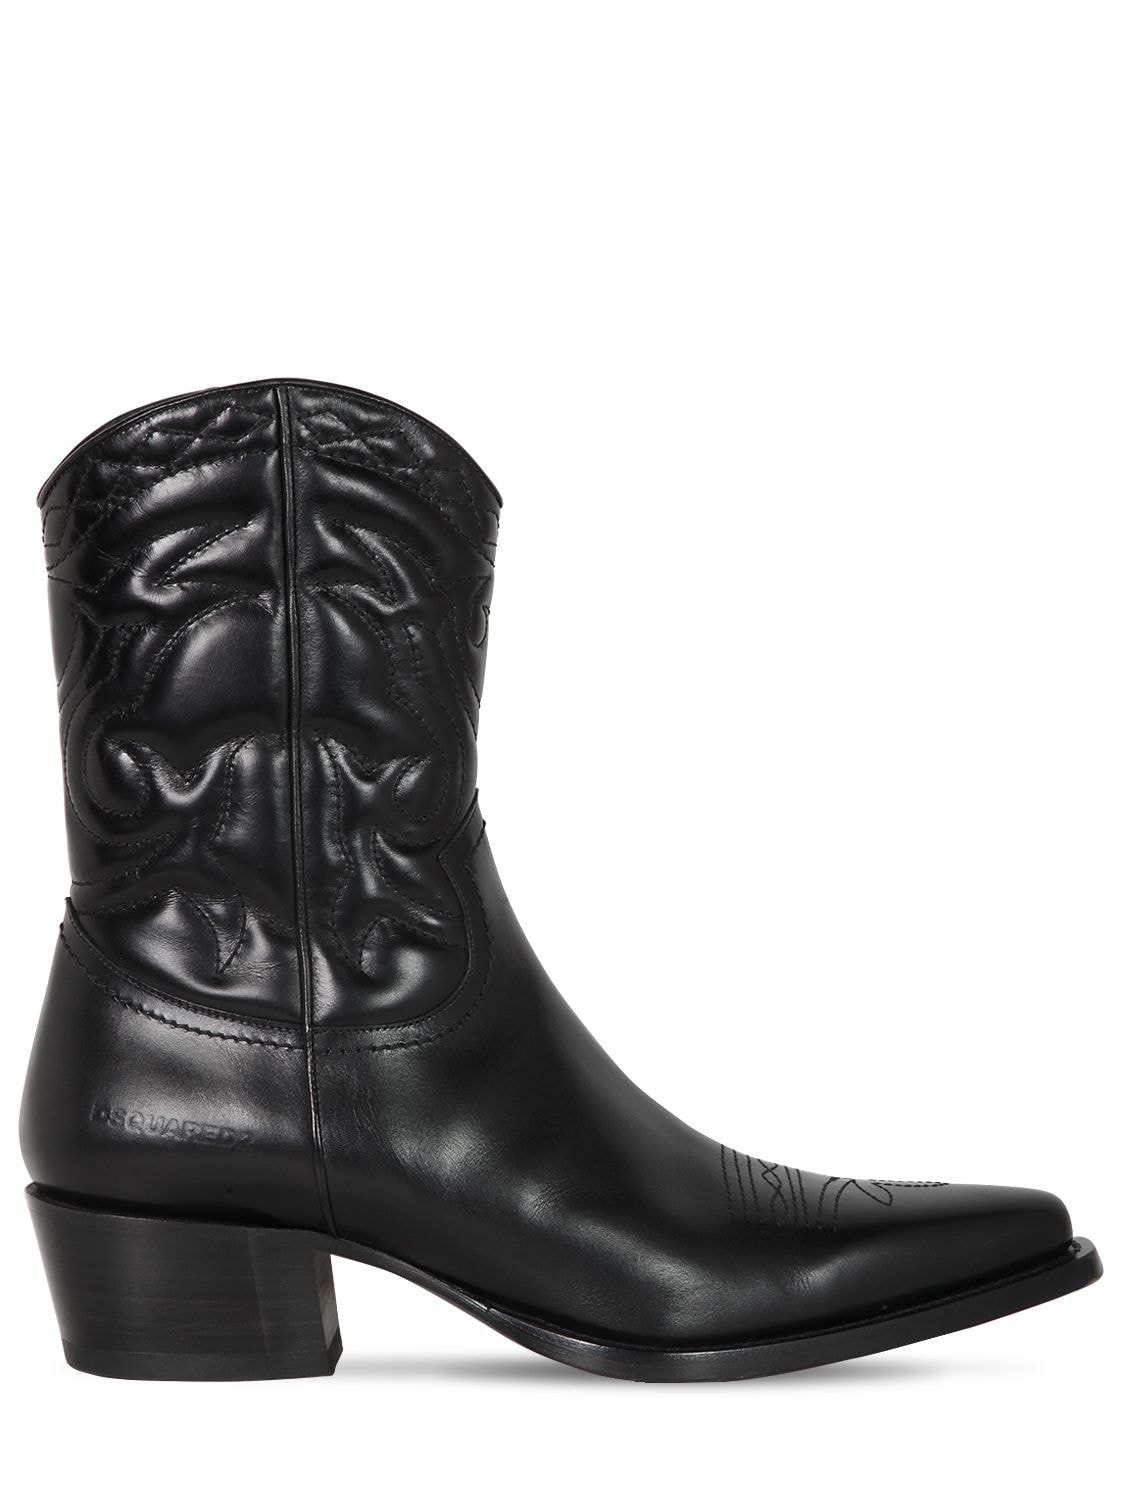 DSQUARED2 50MM QUILTED LEATHER COWBOY BOOTS,68I075007-MJEYNA2